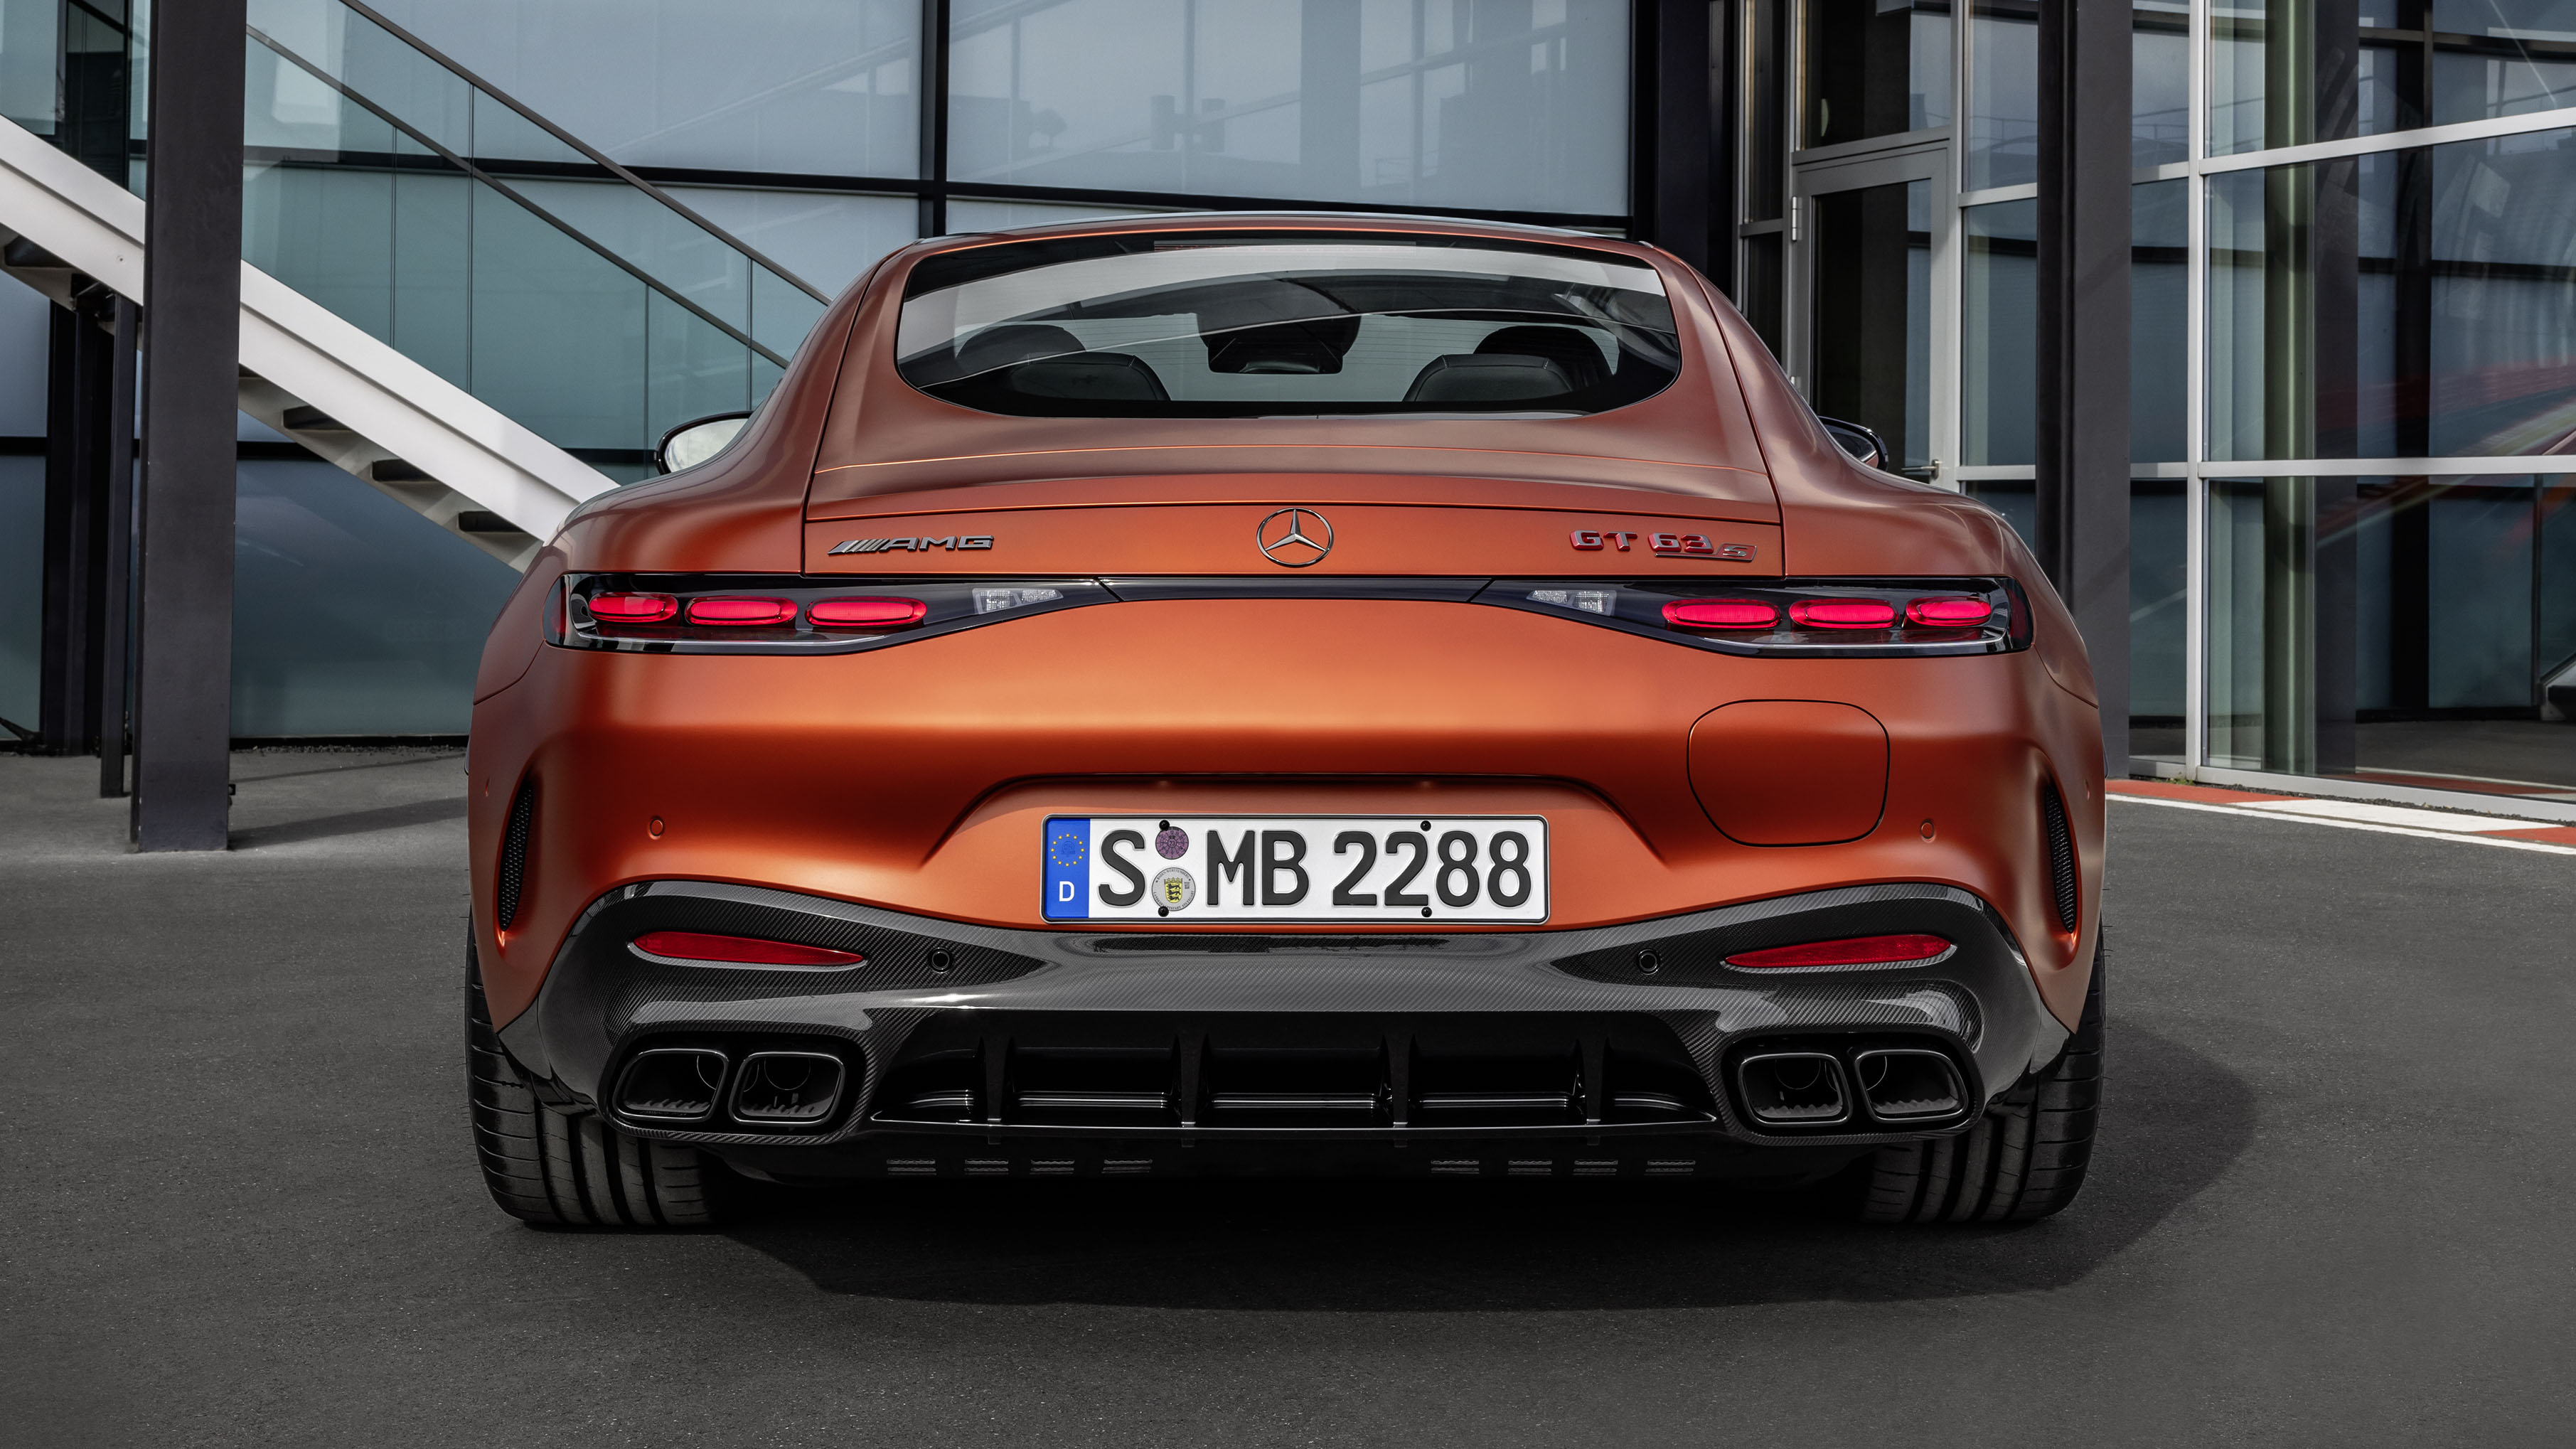 behold, the fastest-accelerating mercedes-amg ever: the new amg gt hybrid